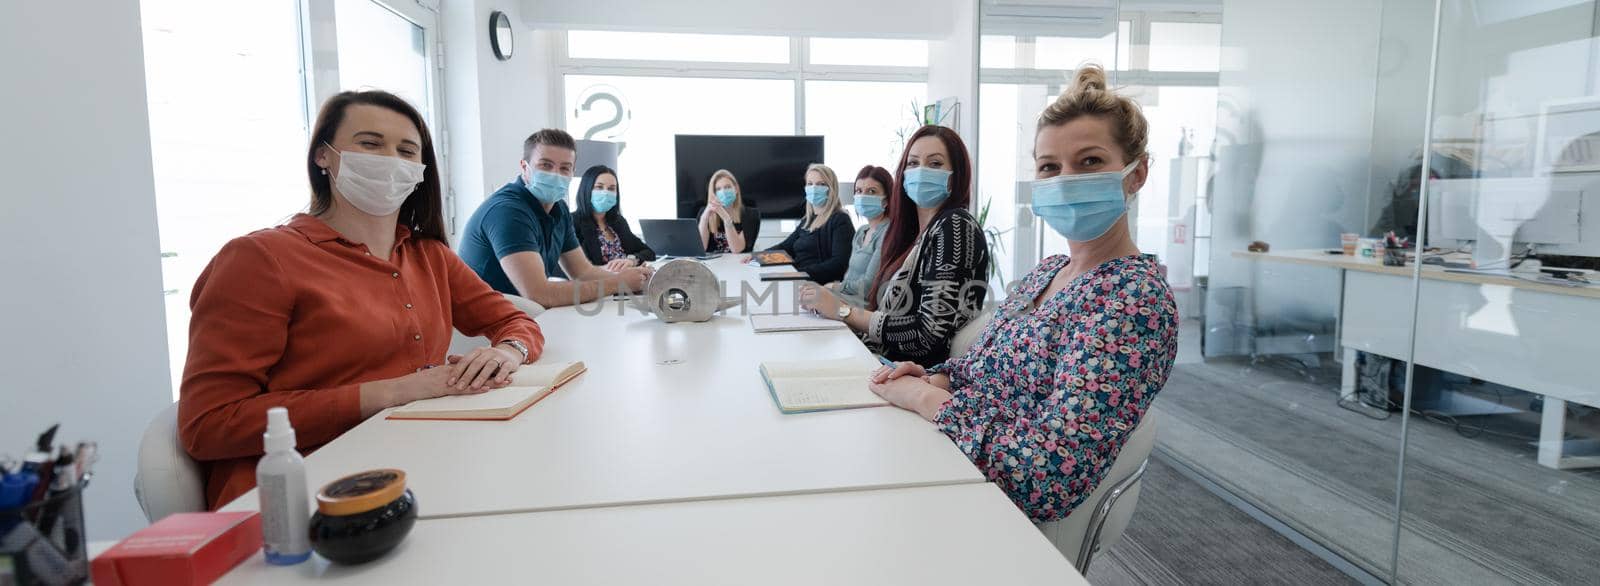 real business people on meeting wearing protective mask by dotshock